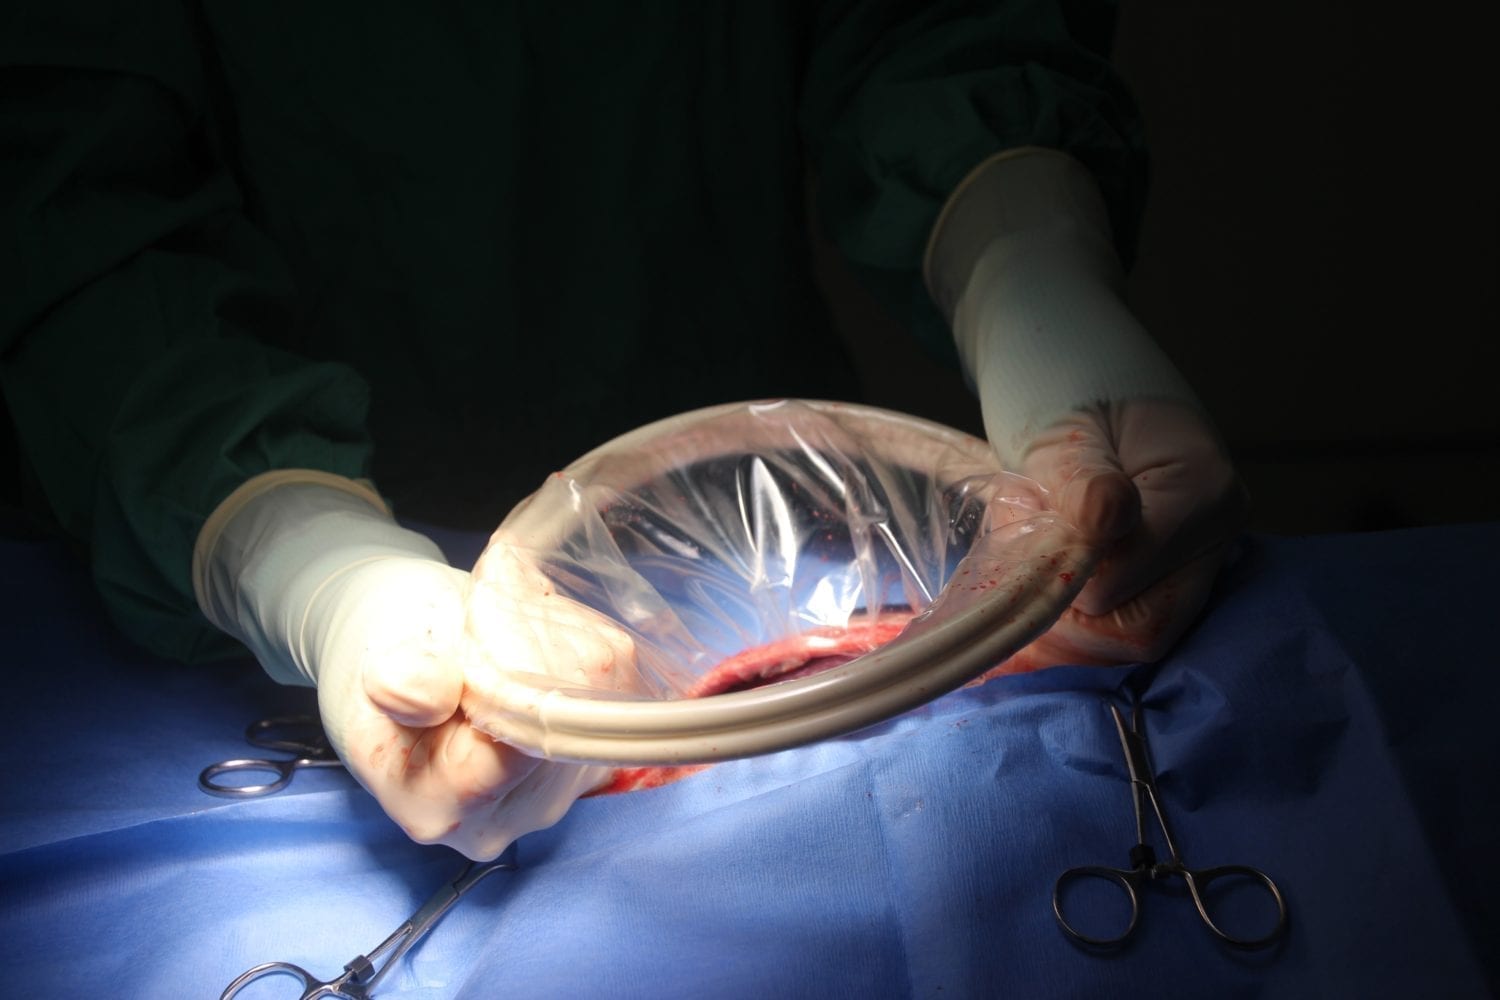 New Zealand Doctors Forget 9cm Surgical Ring Inside Woman